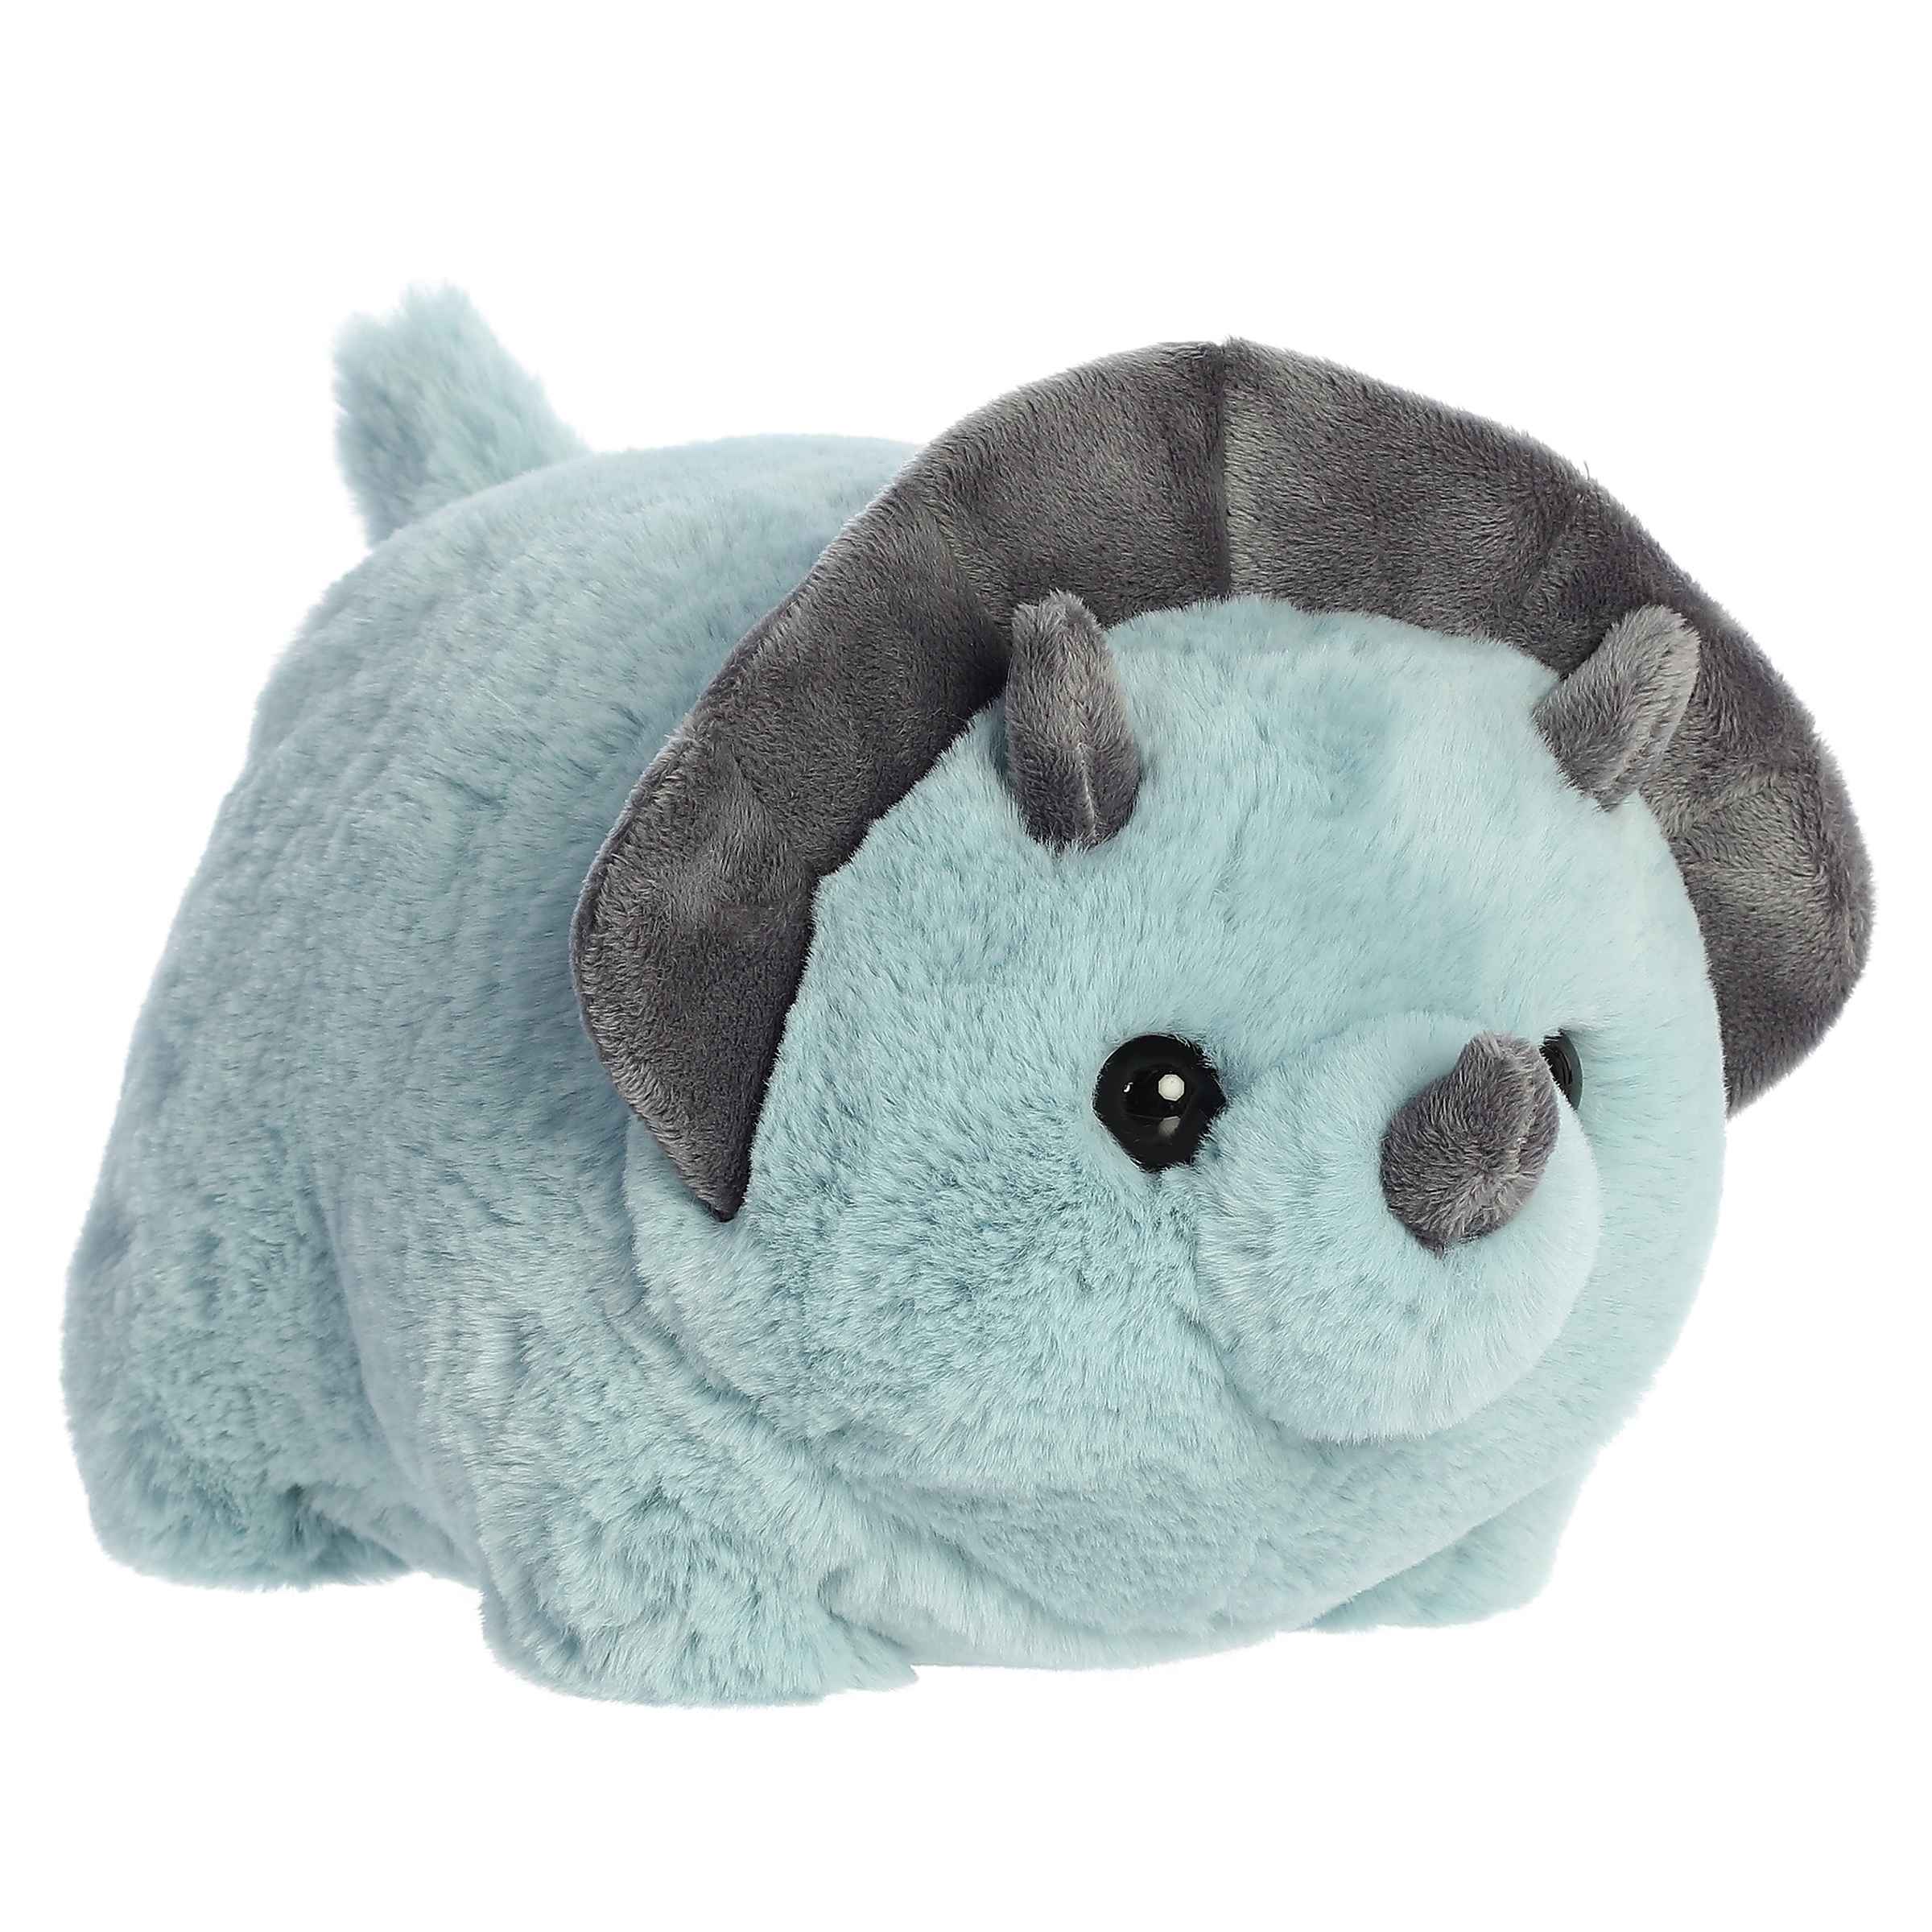 Taren Triceratops plush from Spudsters, blue and gray, prehistoric fun, comforting